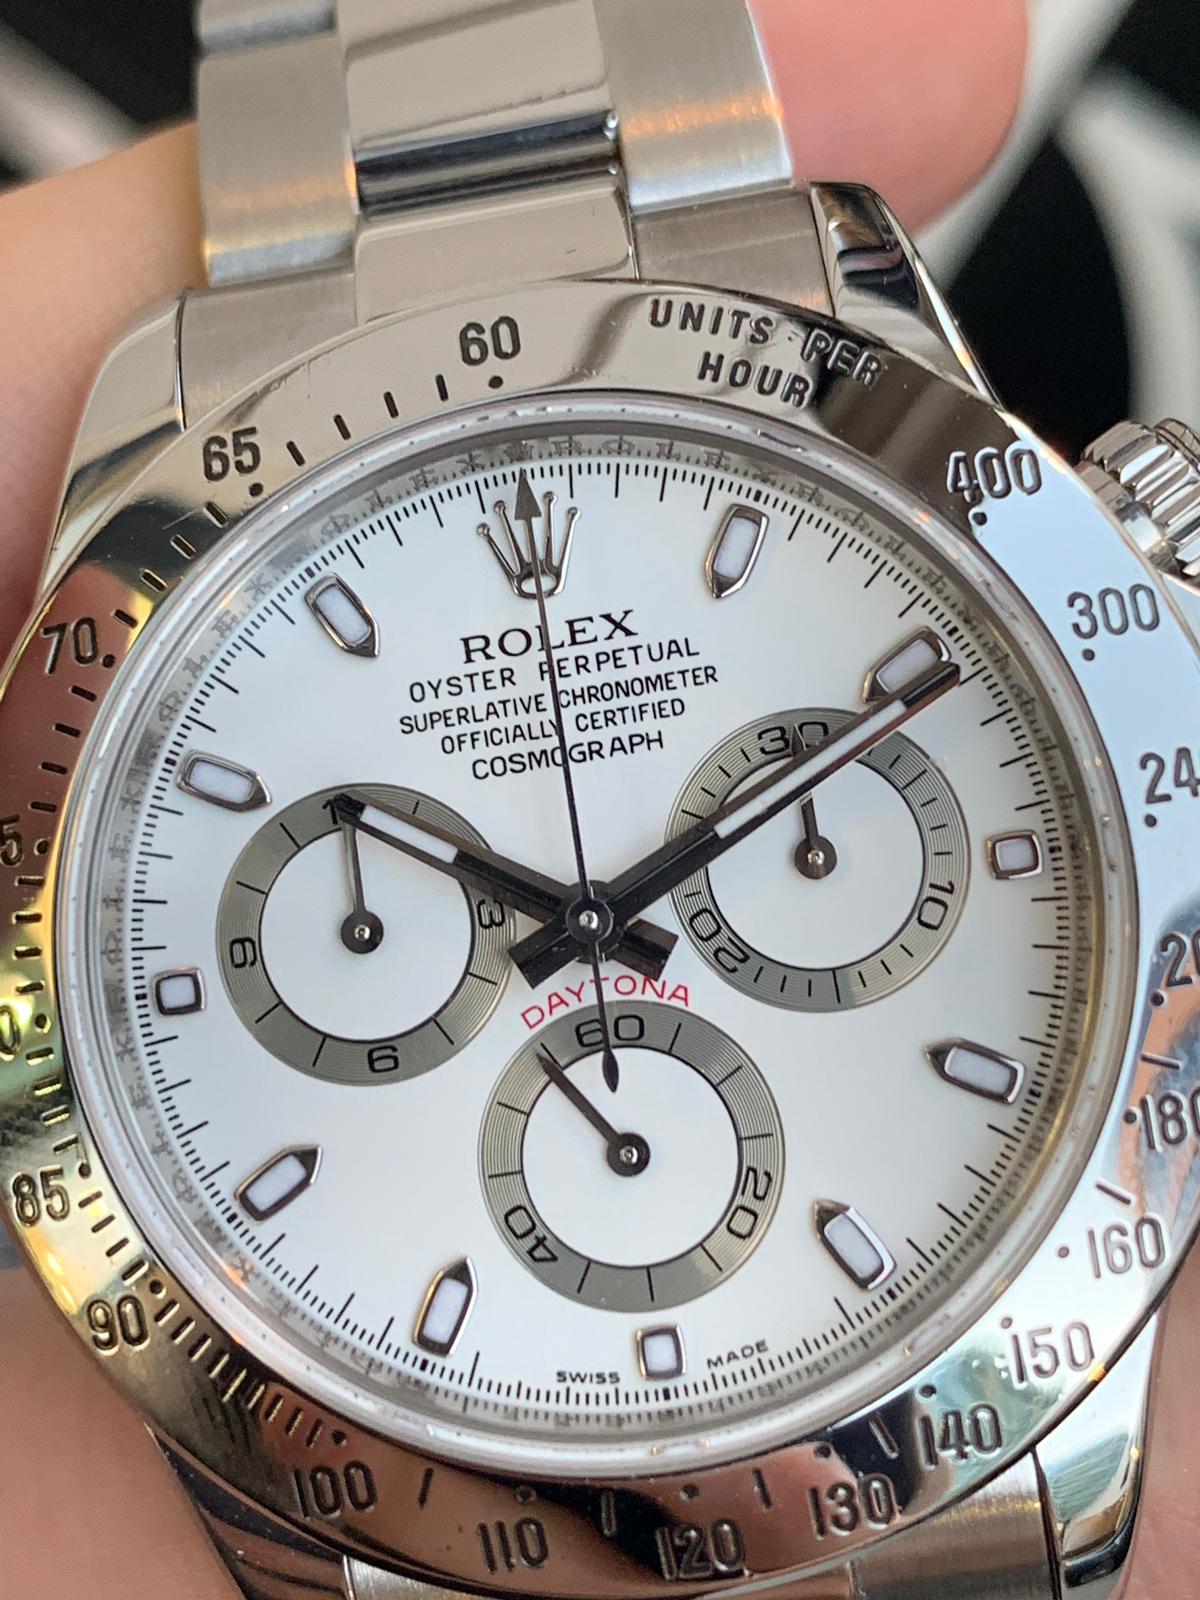 ROLEX COSMOGRAPH DAYTONA 116520 STAINLESS STEEL - Carr Watches Stainless Steel Daytona For Sale